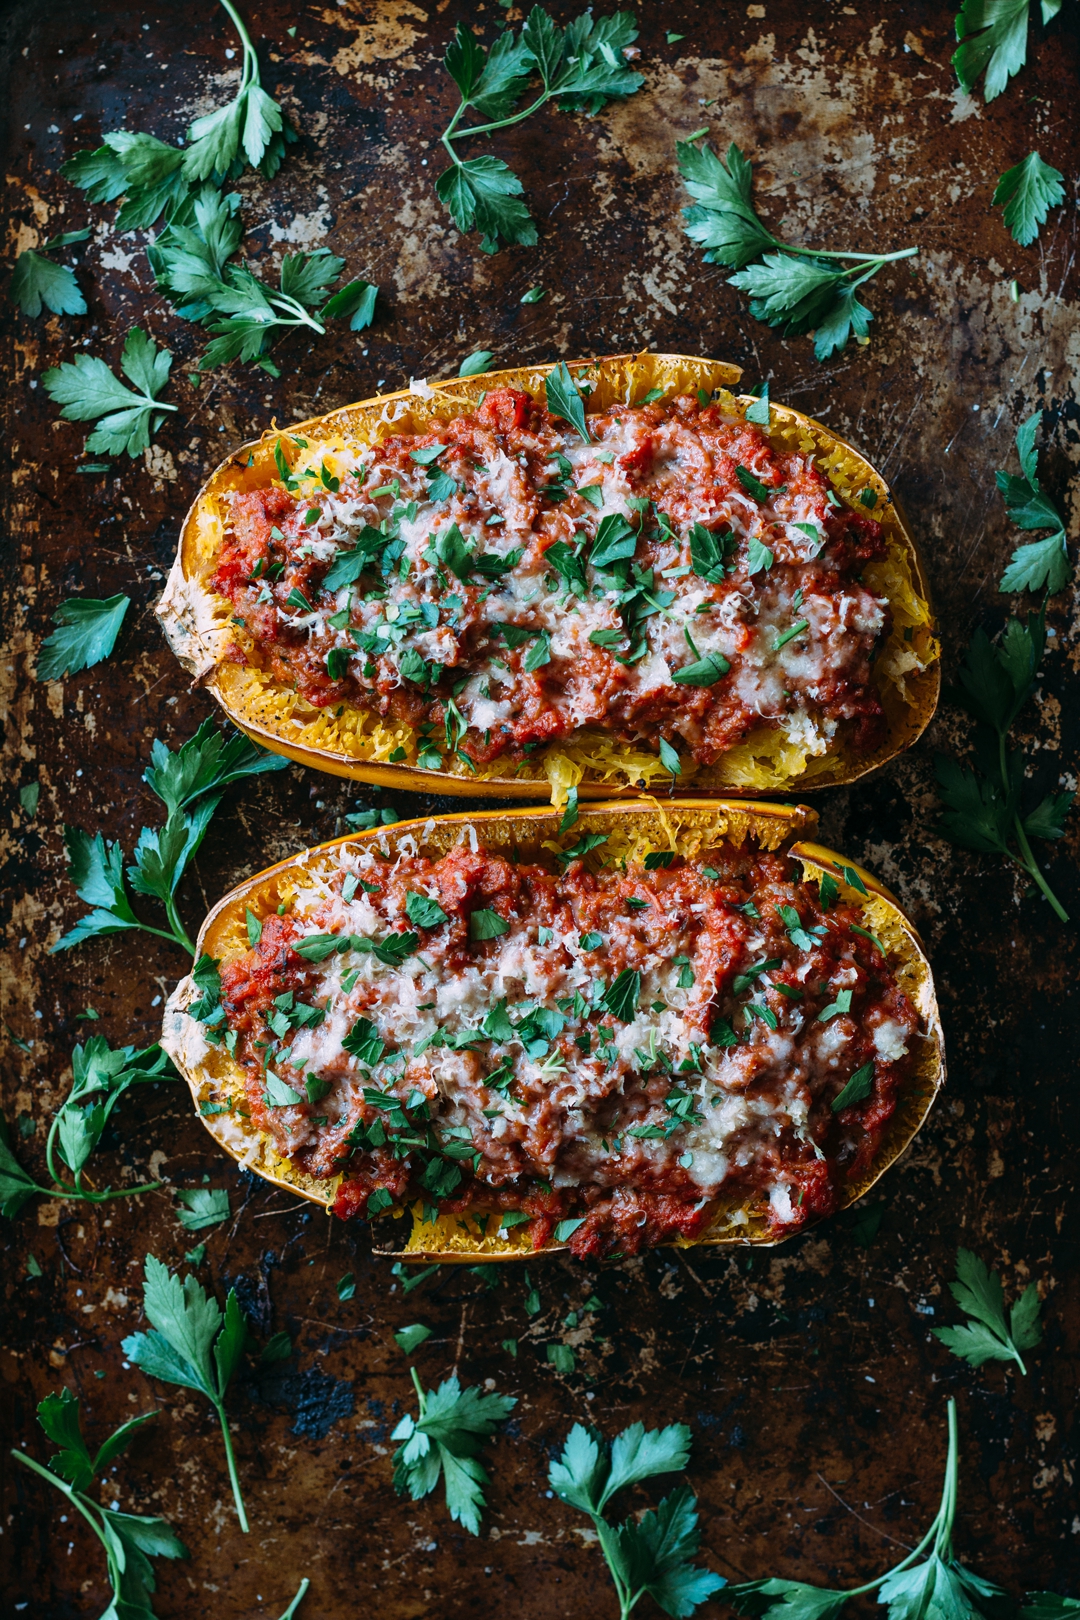 (sponsored by Jennie-O) Spaghetti Squash Bowls with Turkey Sausage and Marinara Sauce: ditch the carbs and the fatty meat for a healthier meal that’s just as flavorful. #spaghettisquash #turkey #marinarasauce #healthy | www.megiswell.com